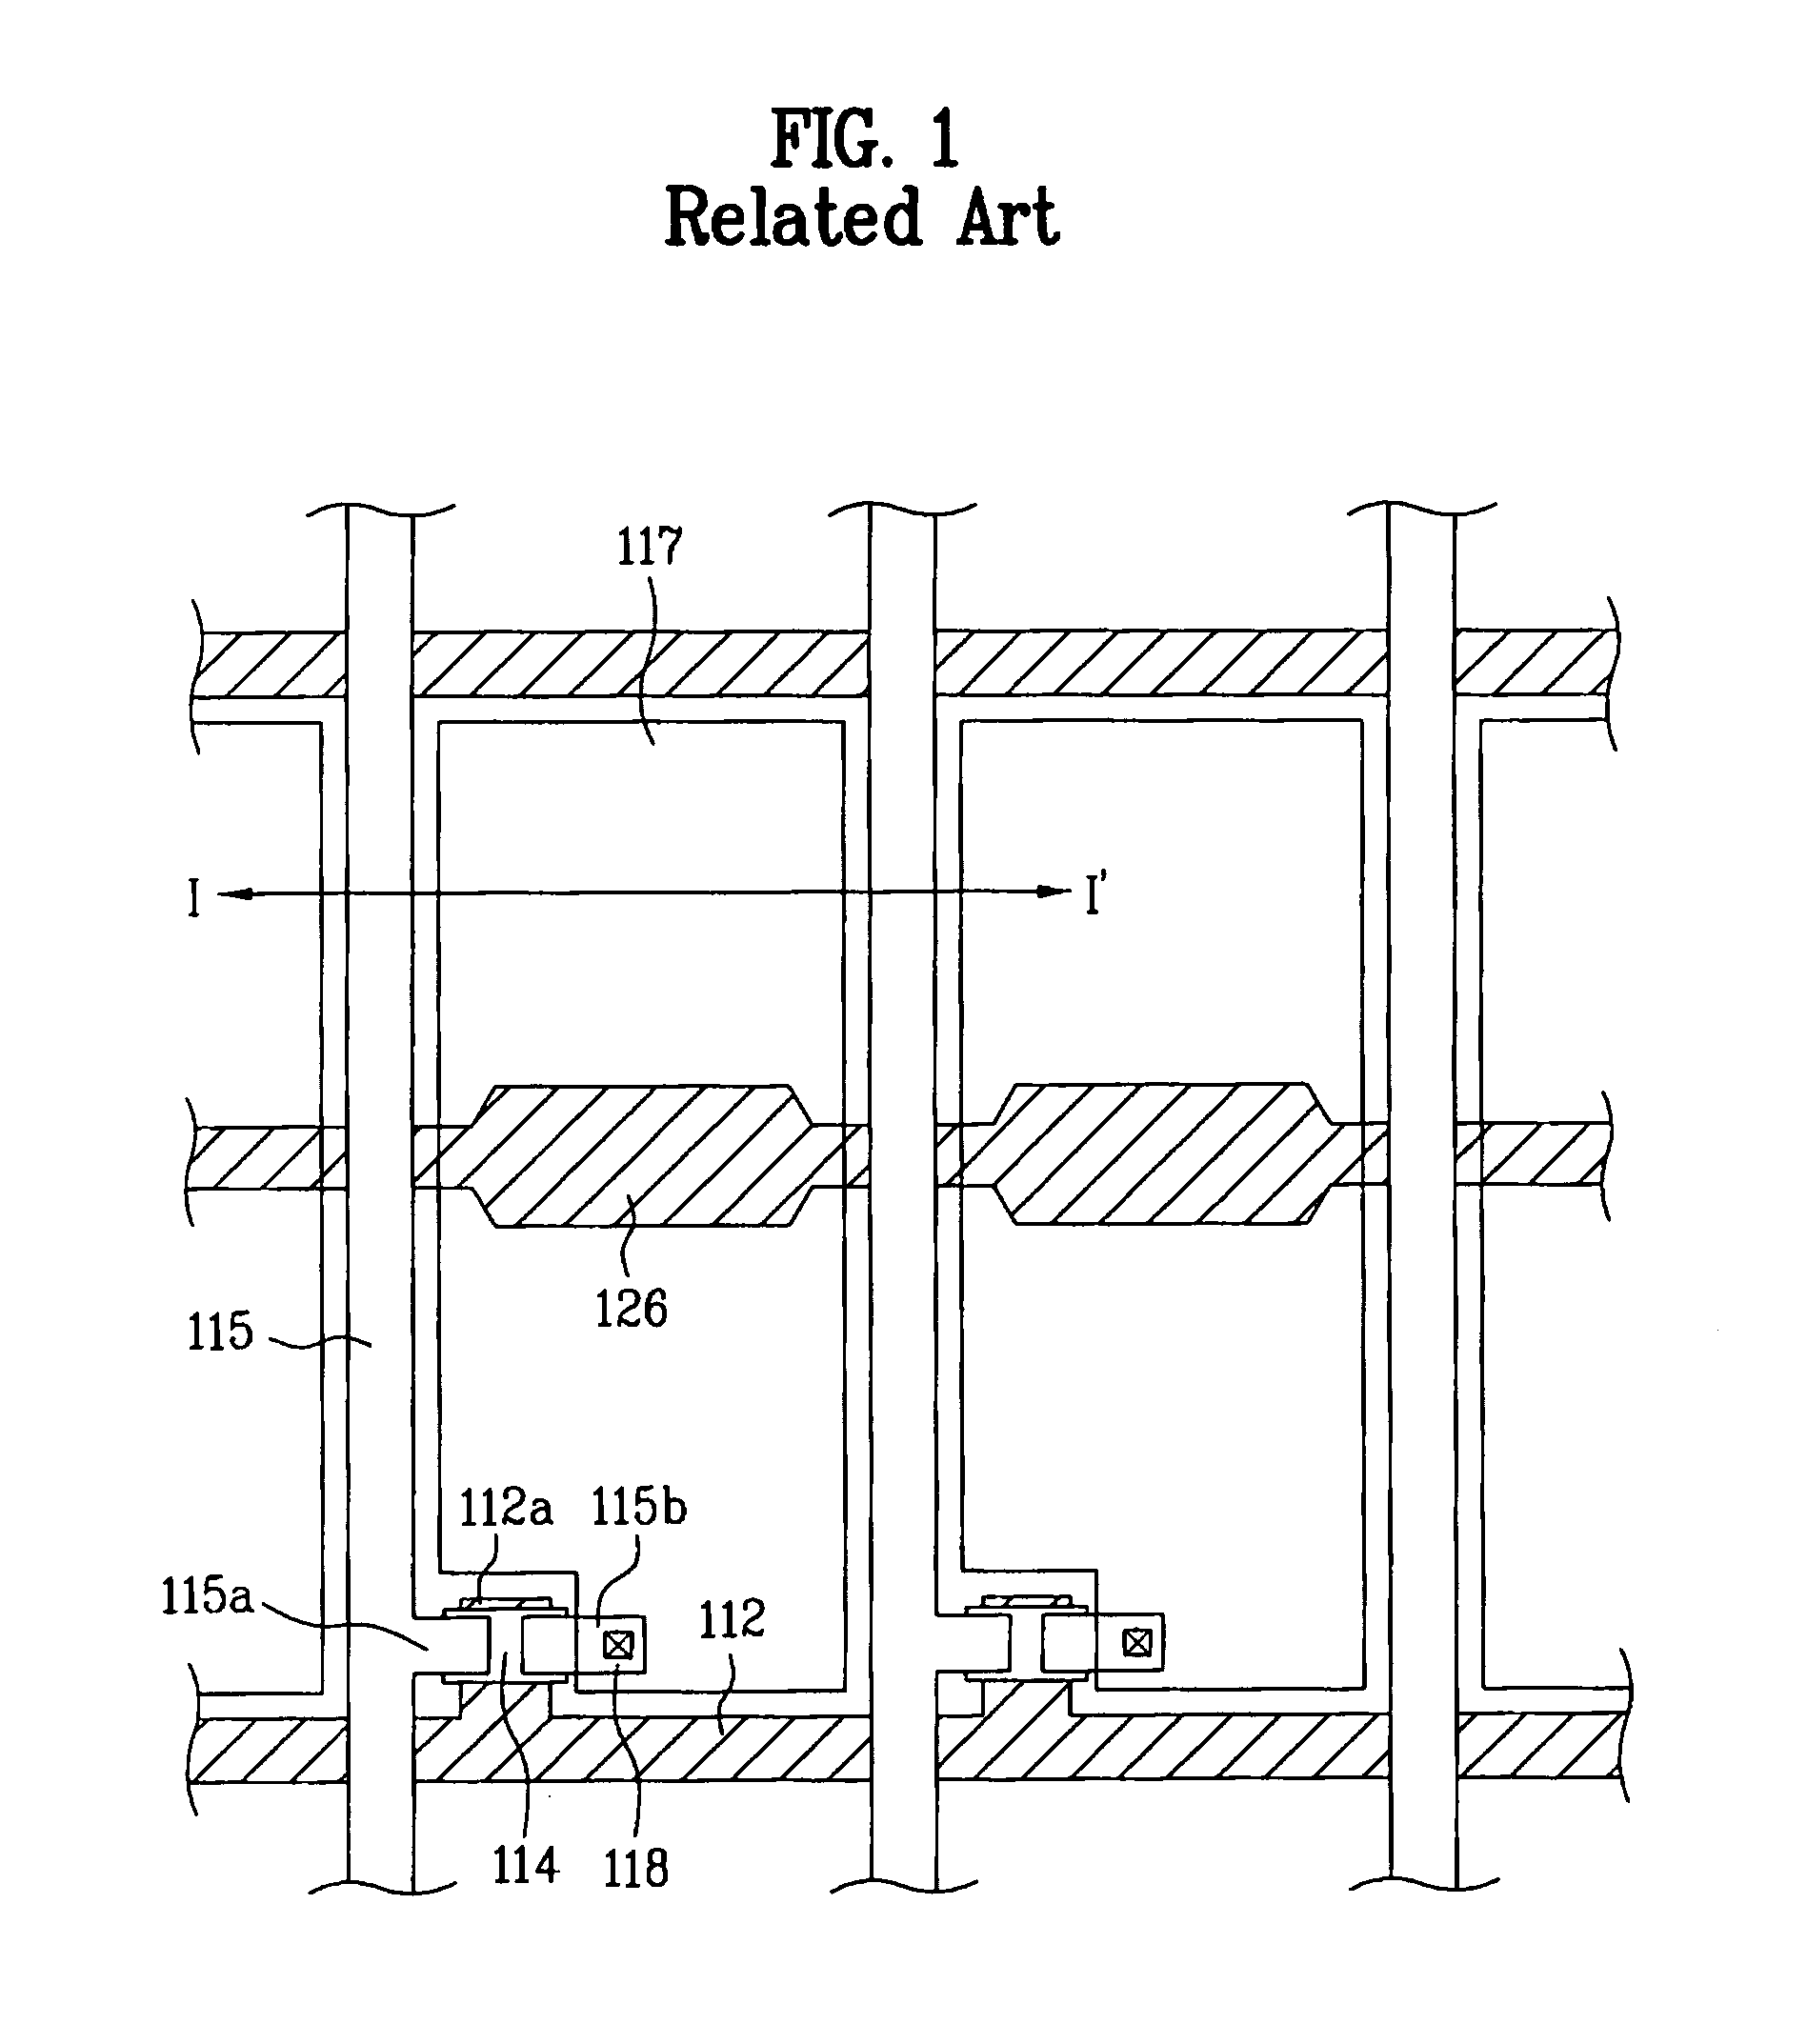 Liquid crystal display device having common line parallel to and between gate line and pixel electrode with light shield projecting from common line parallel to data line and overlapping area between data line and pixel electrode